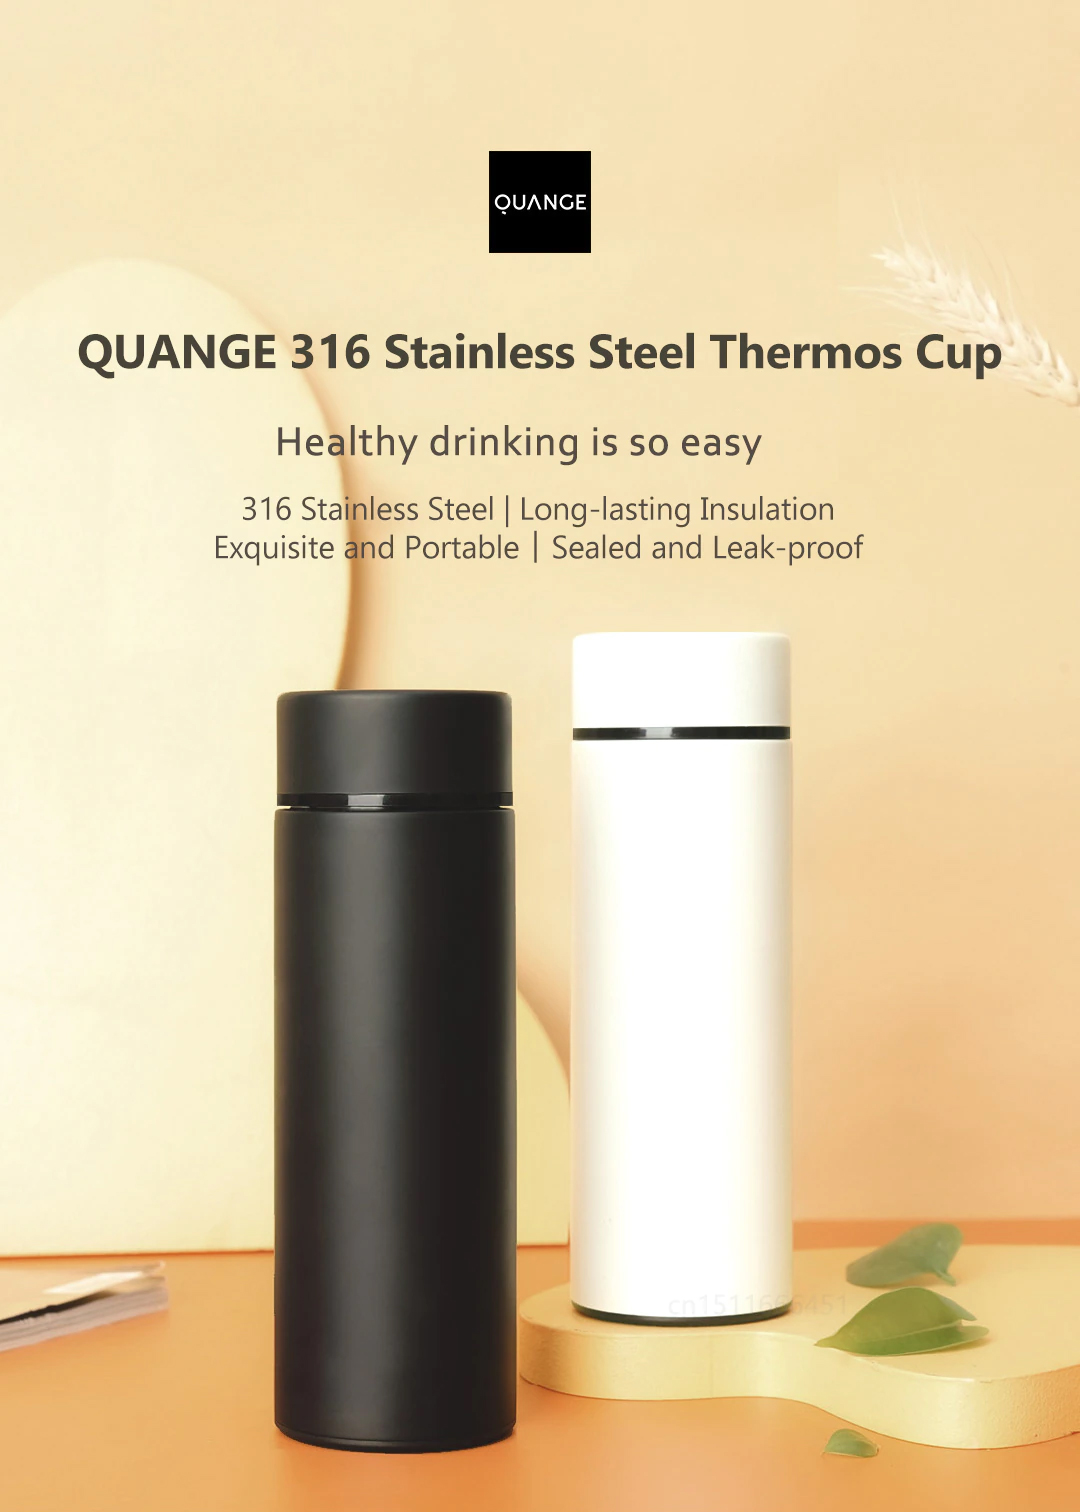 QUANGE 316 Stainless Steel Thermos Cup Healthy drinking is so easy 316 Sta less Steel I Long-lasting Insulation Exquisite and Portable I Sealed and Leak-proof